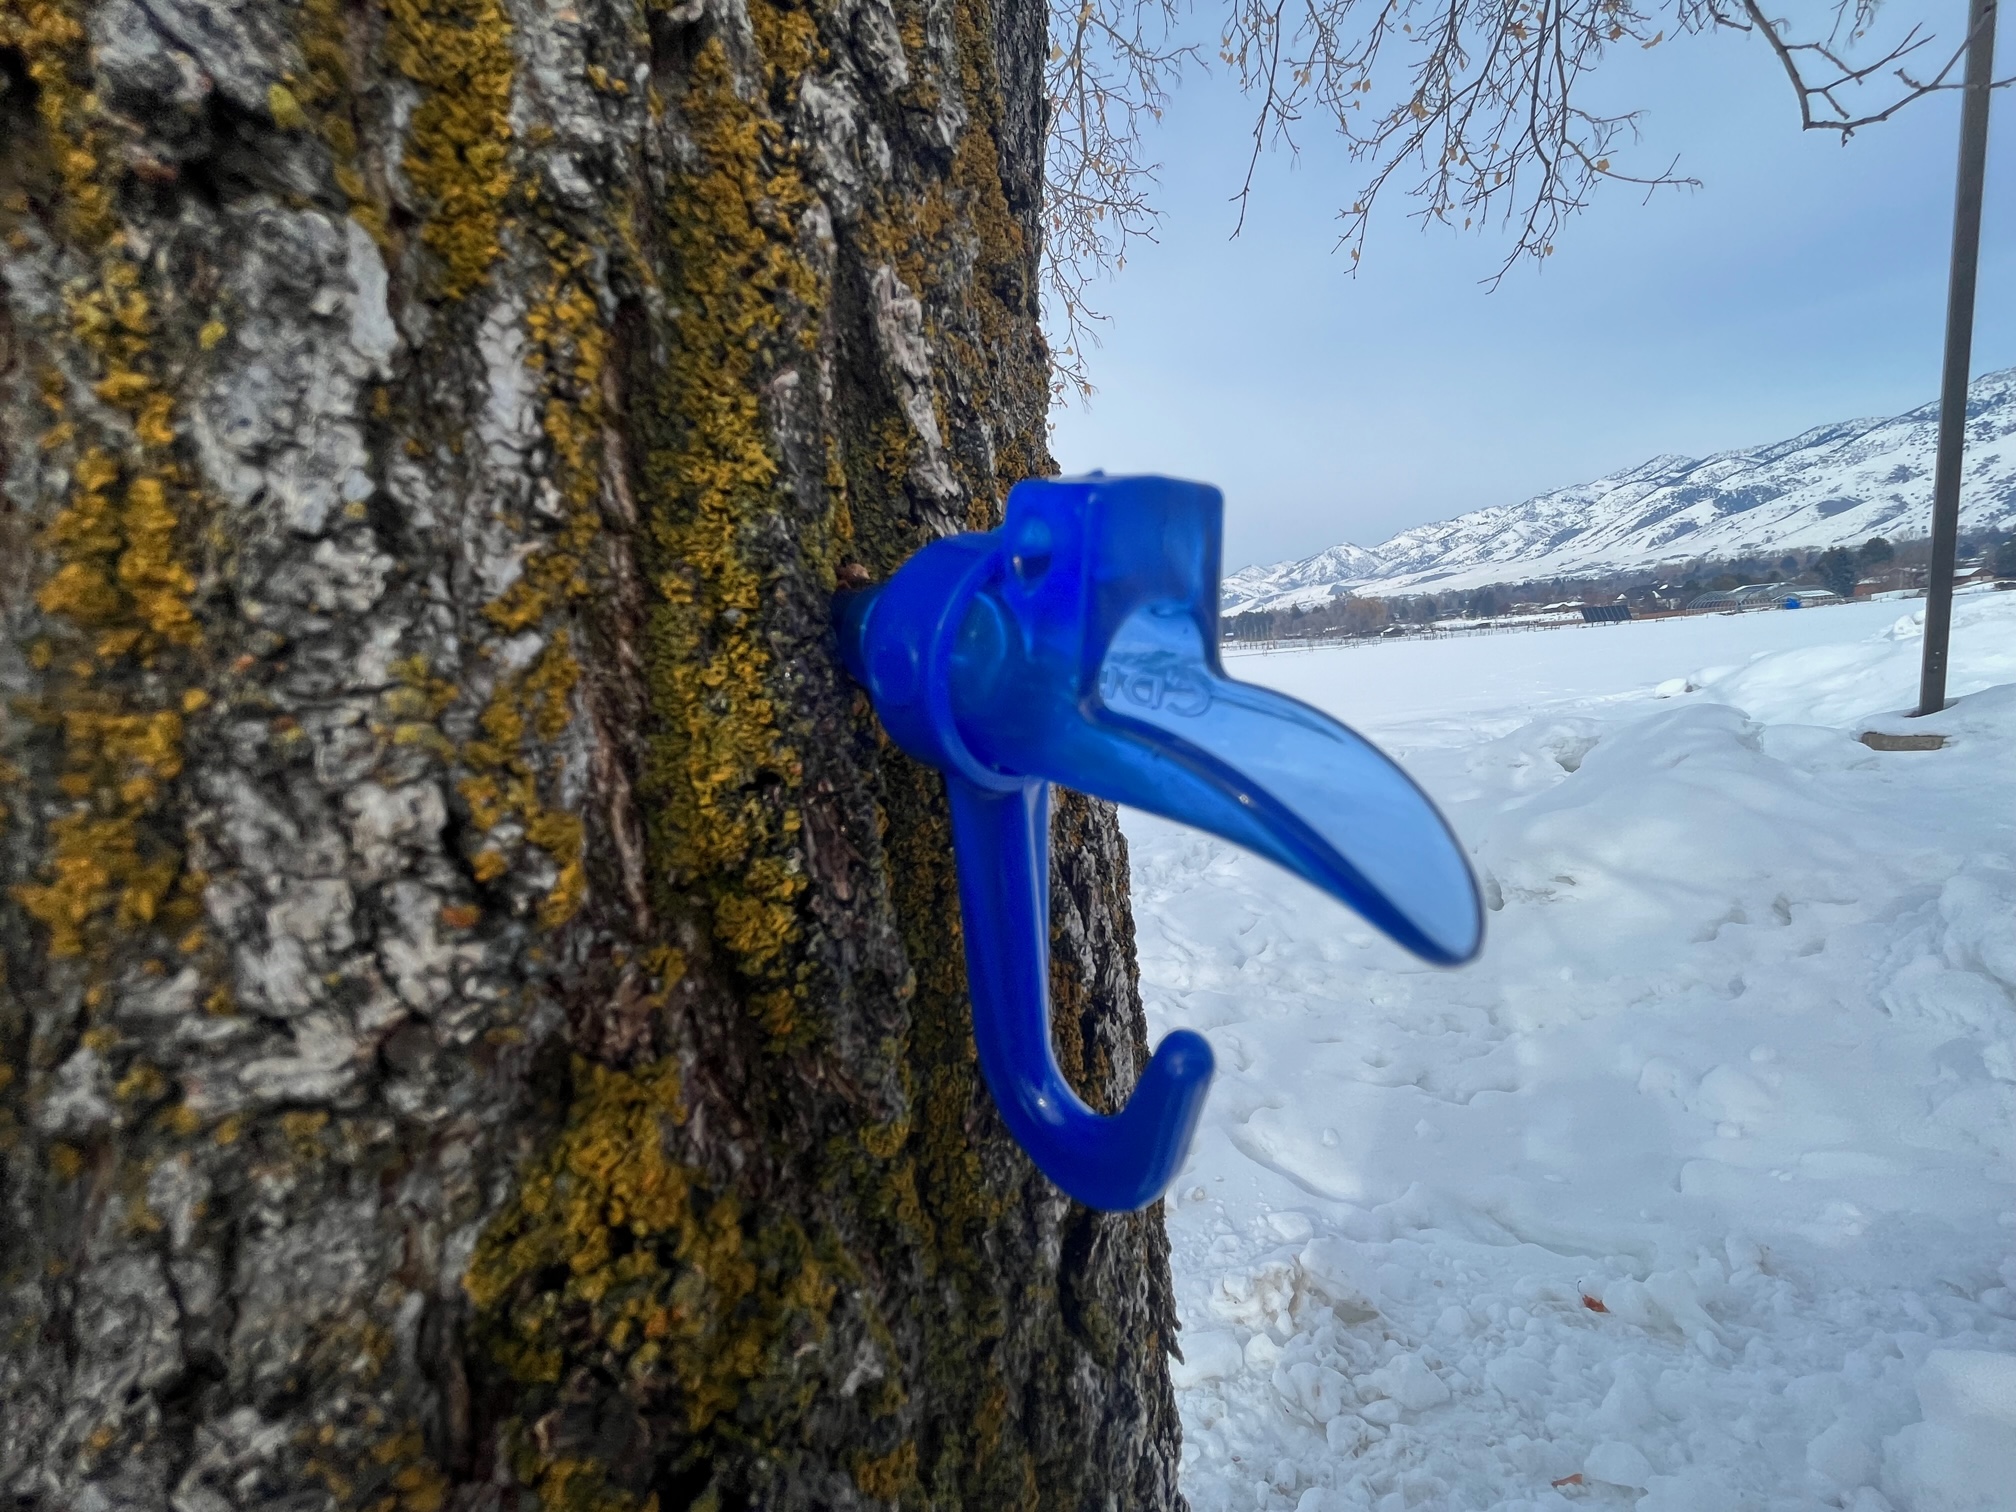 A blue plastic spile in a tree trunk